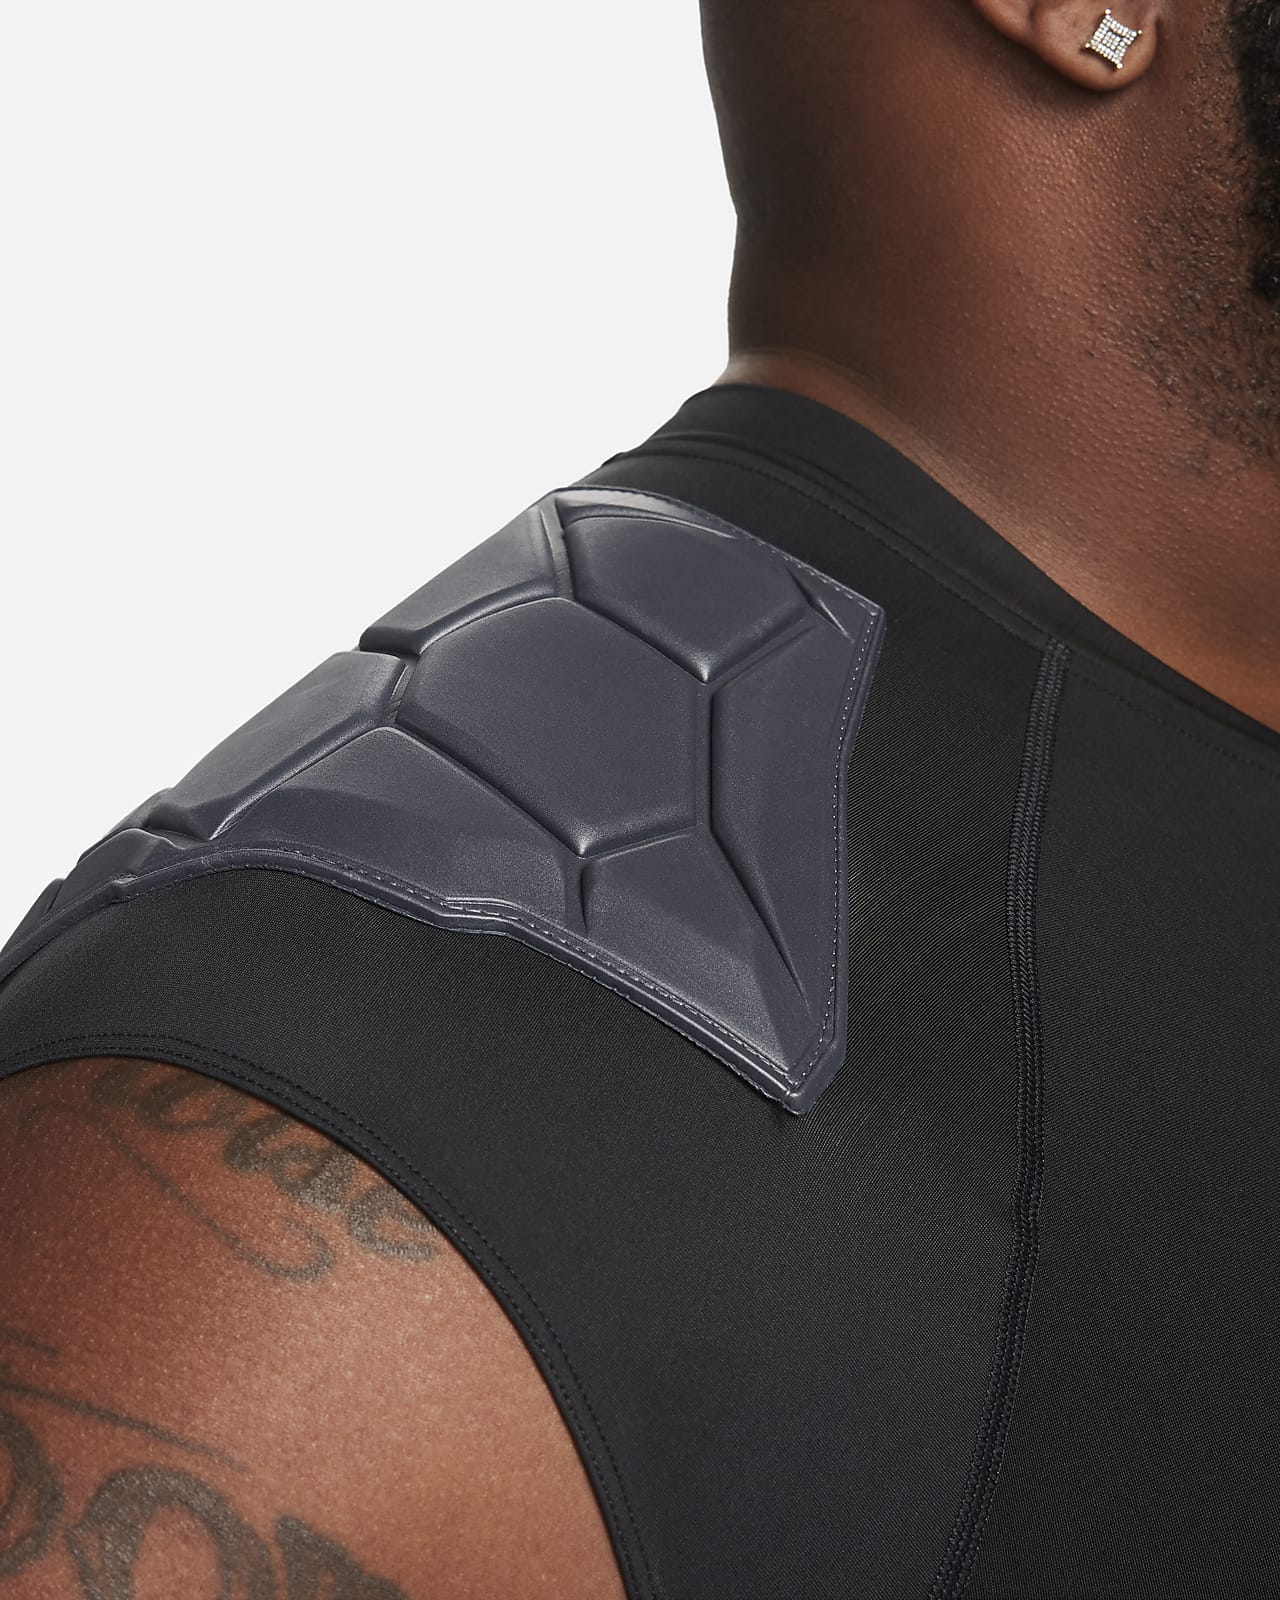 nike_pro_combat_hyperstrong_4_pad_top